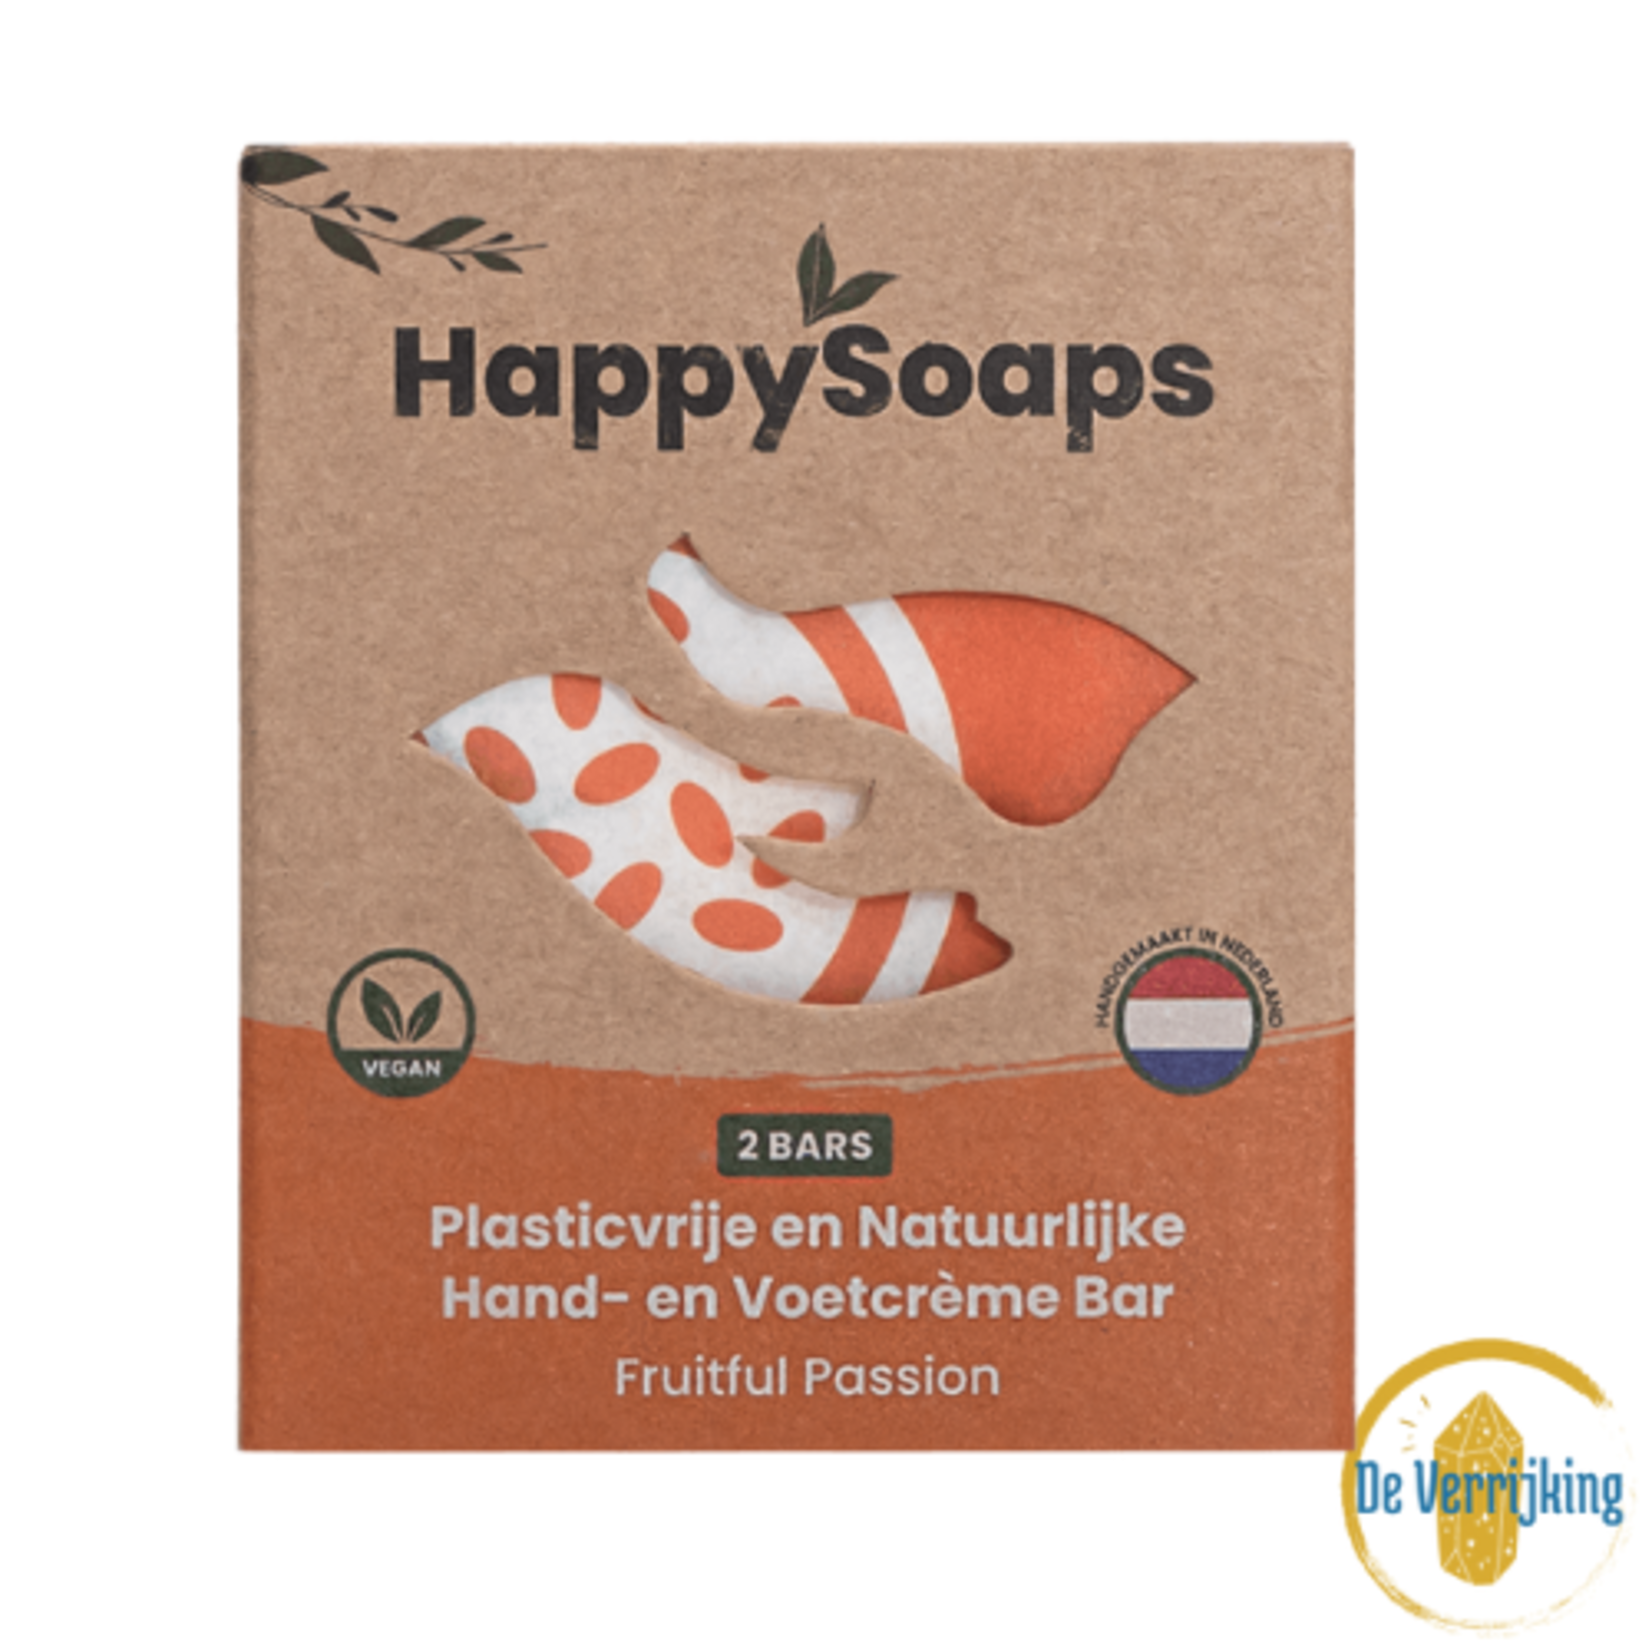 The Happy Soaps Happy Soaps Hand- en voetcreme bar Fruitful passion